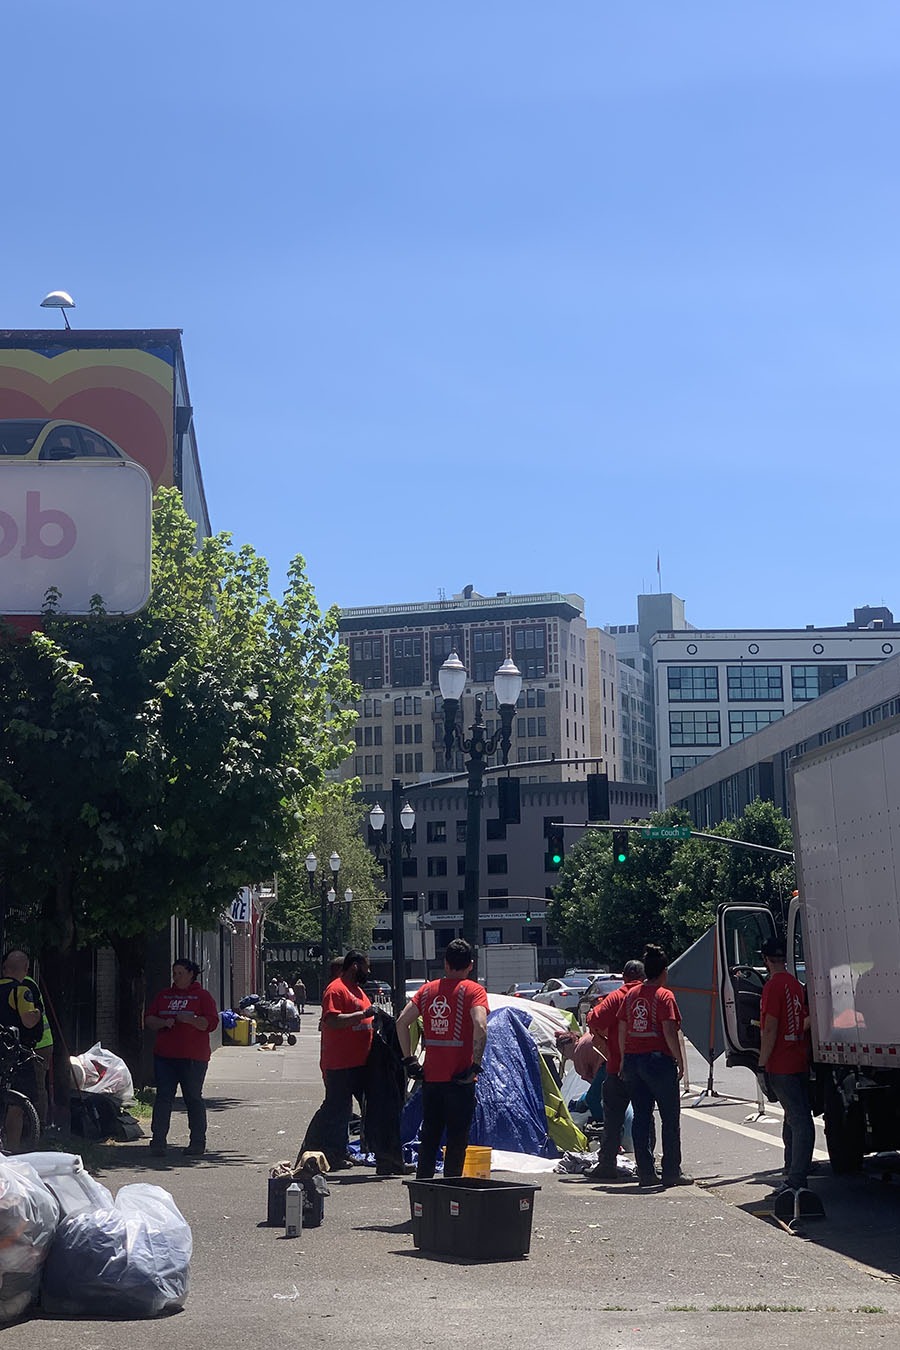 A group of workers in red stands on the sidewalk. On the left side of the sidewalk are plastic bags filled with posessions. In the background are blue skies and buildings.